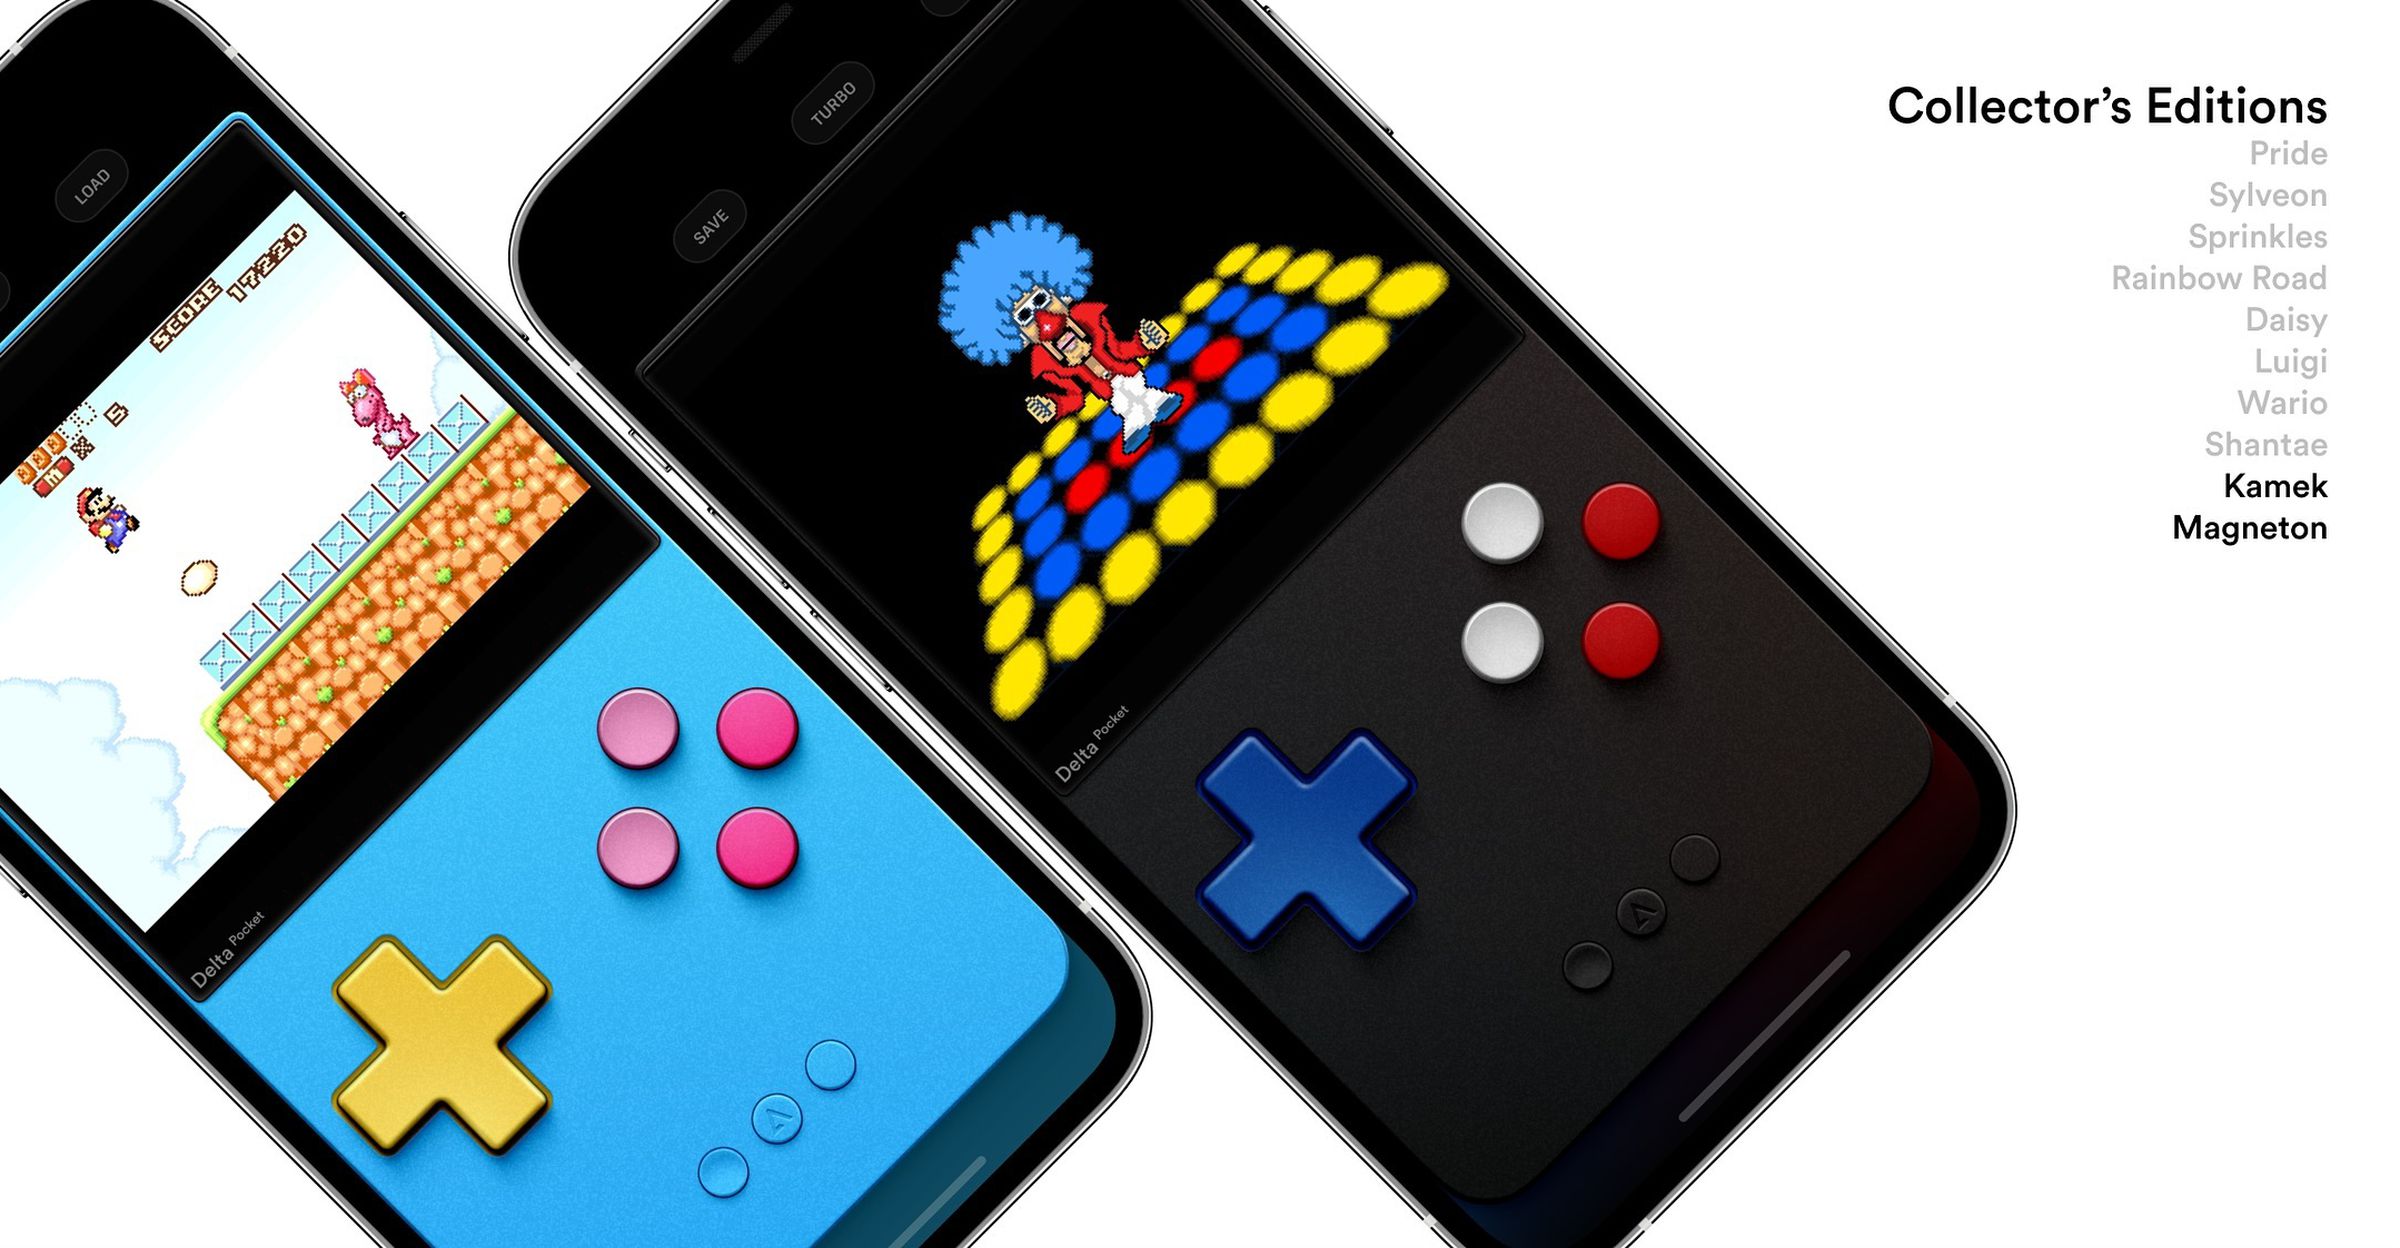 Two skins, one blue with pink and dark pink buttons and a yellow d-pad, one black with dark blue d-pad and white / red buttons.